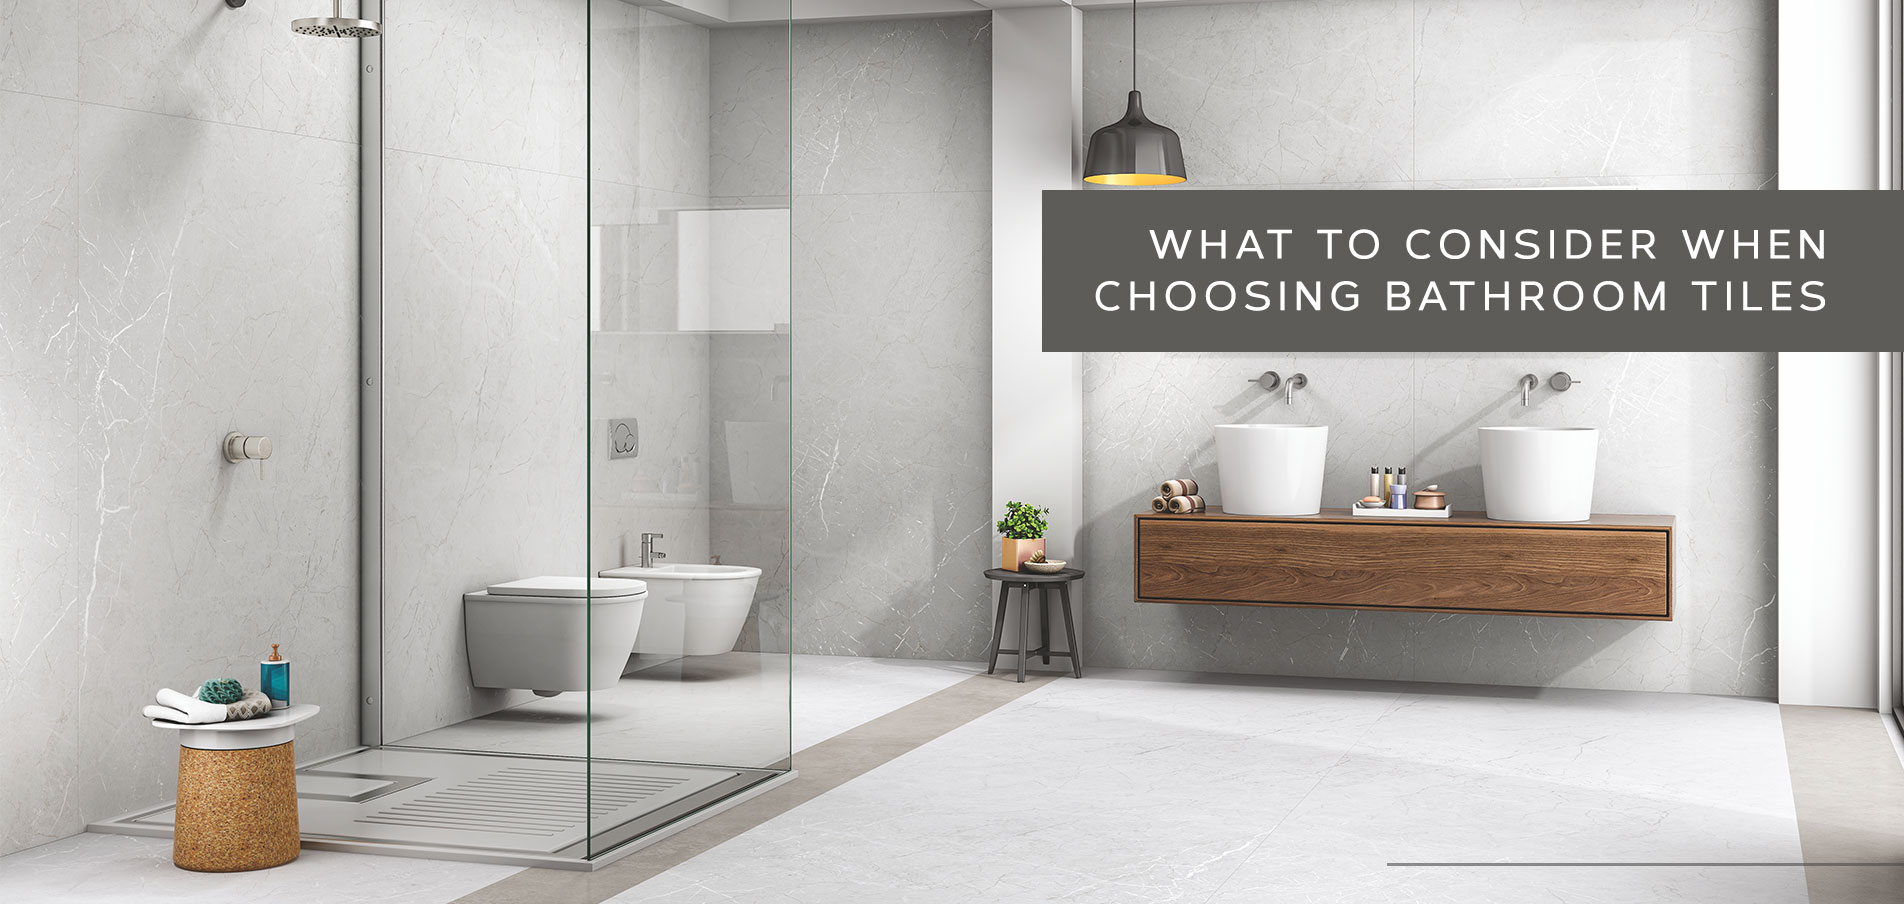 What To Consider When Choosing Bathroom Tiles